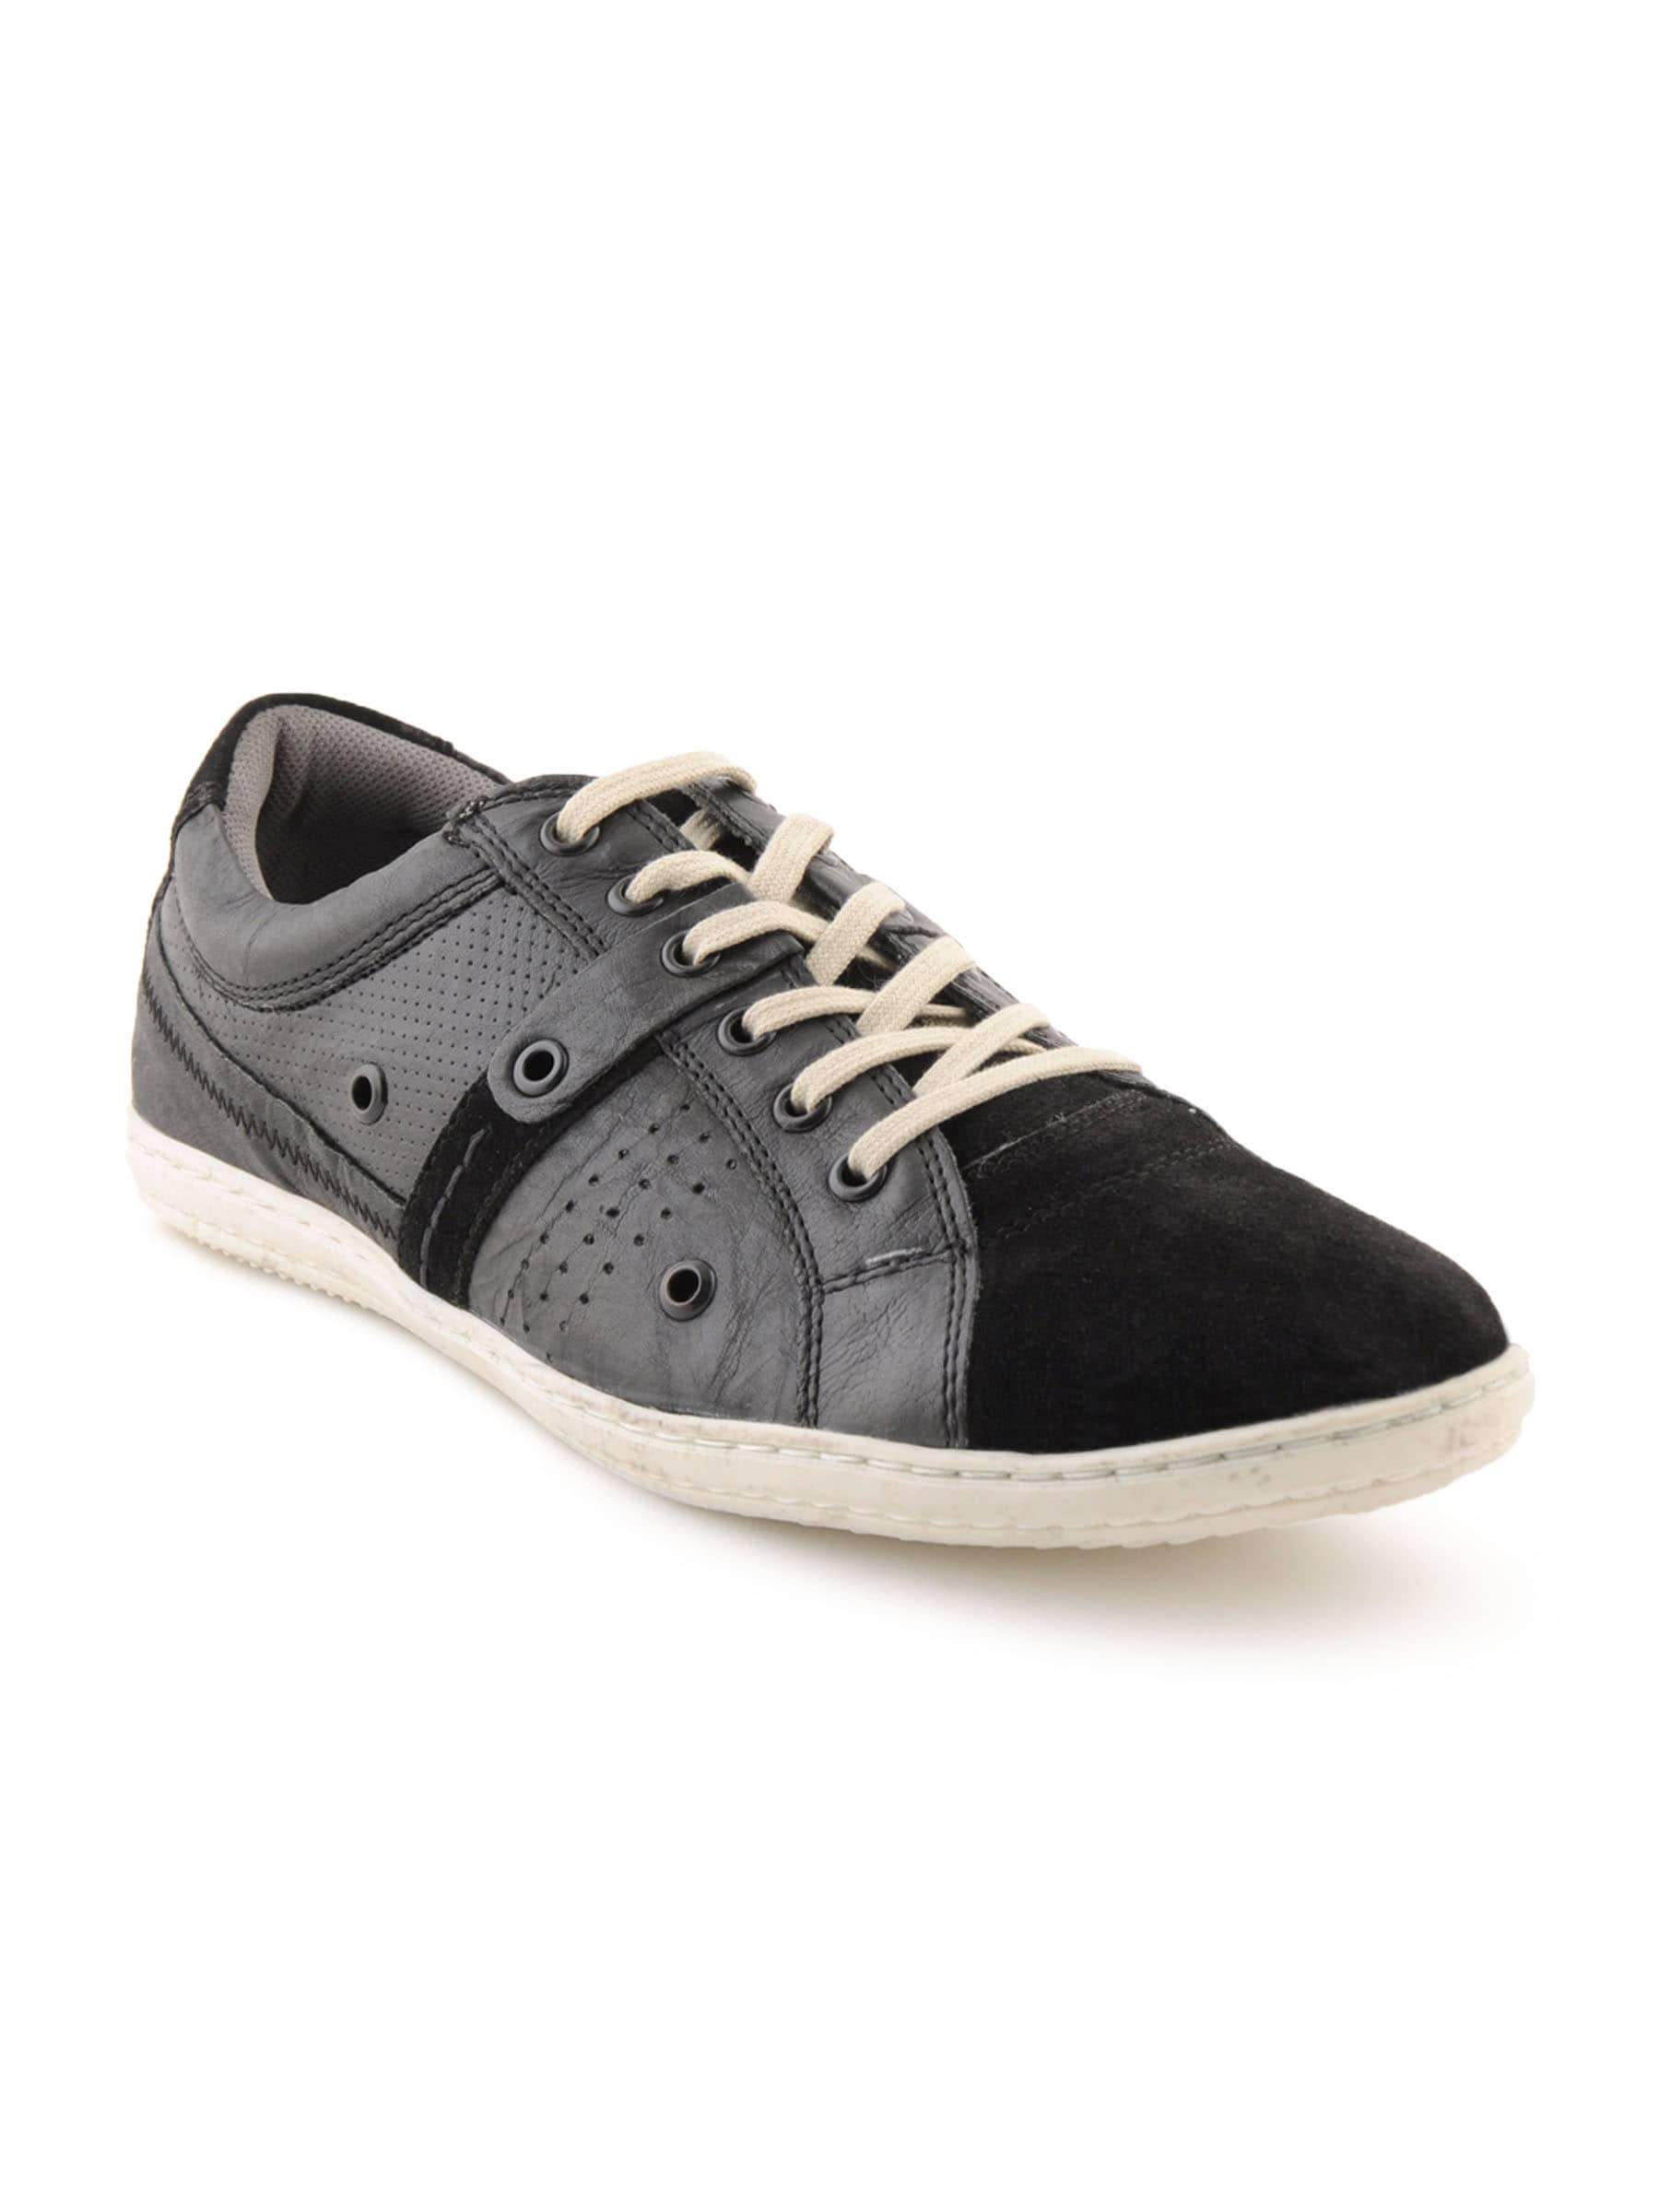 Red Tape Men Casual Black Casual Shoes